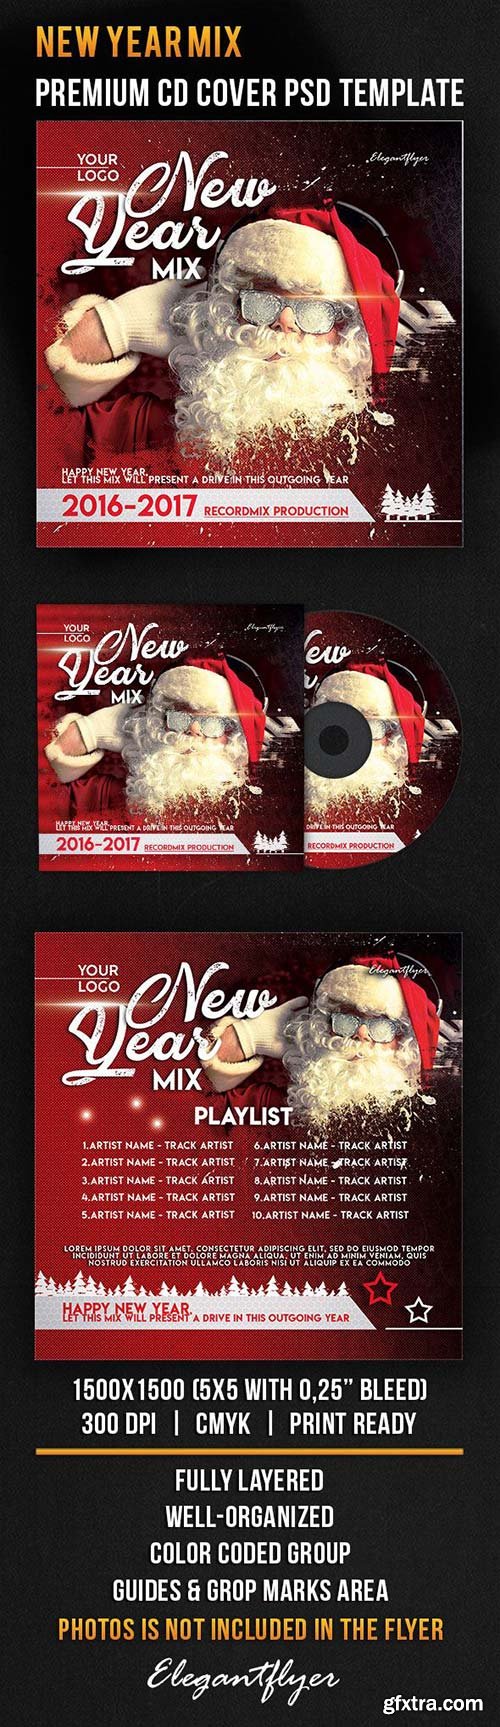 New Year Mix – Premium CD Cover PSD Template